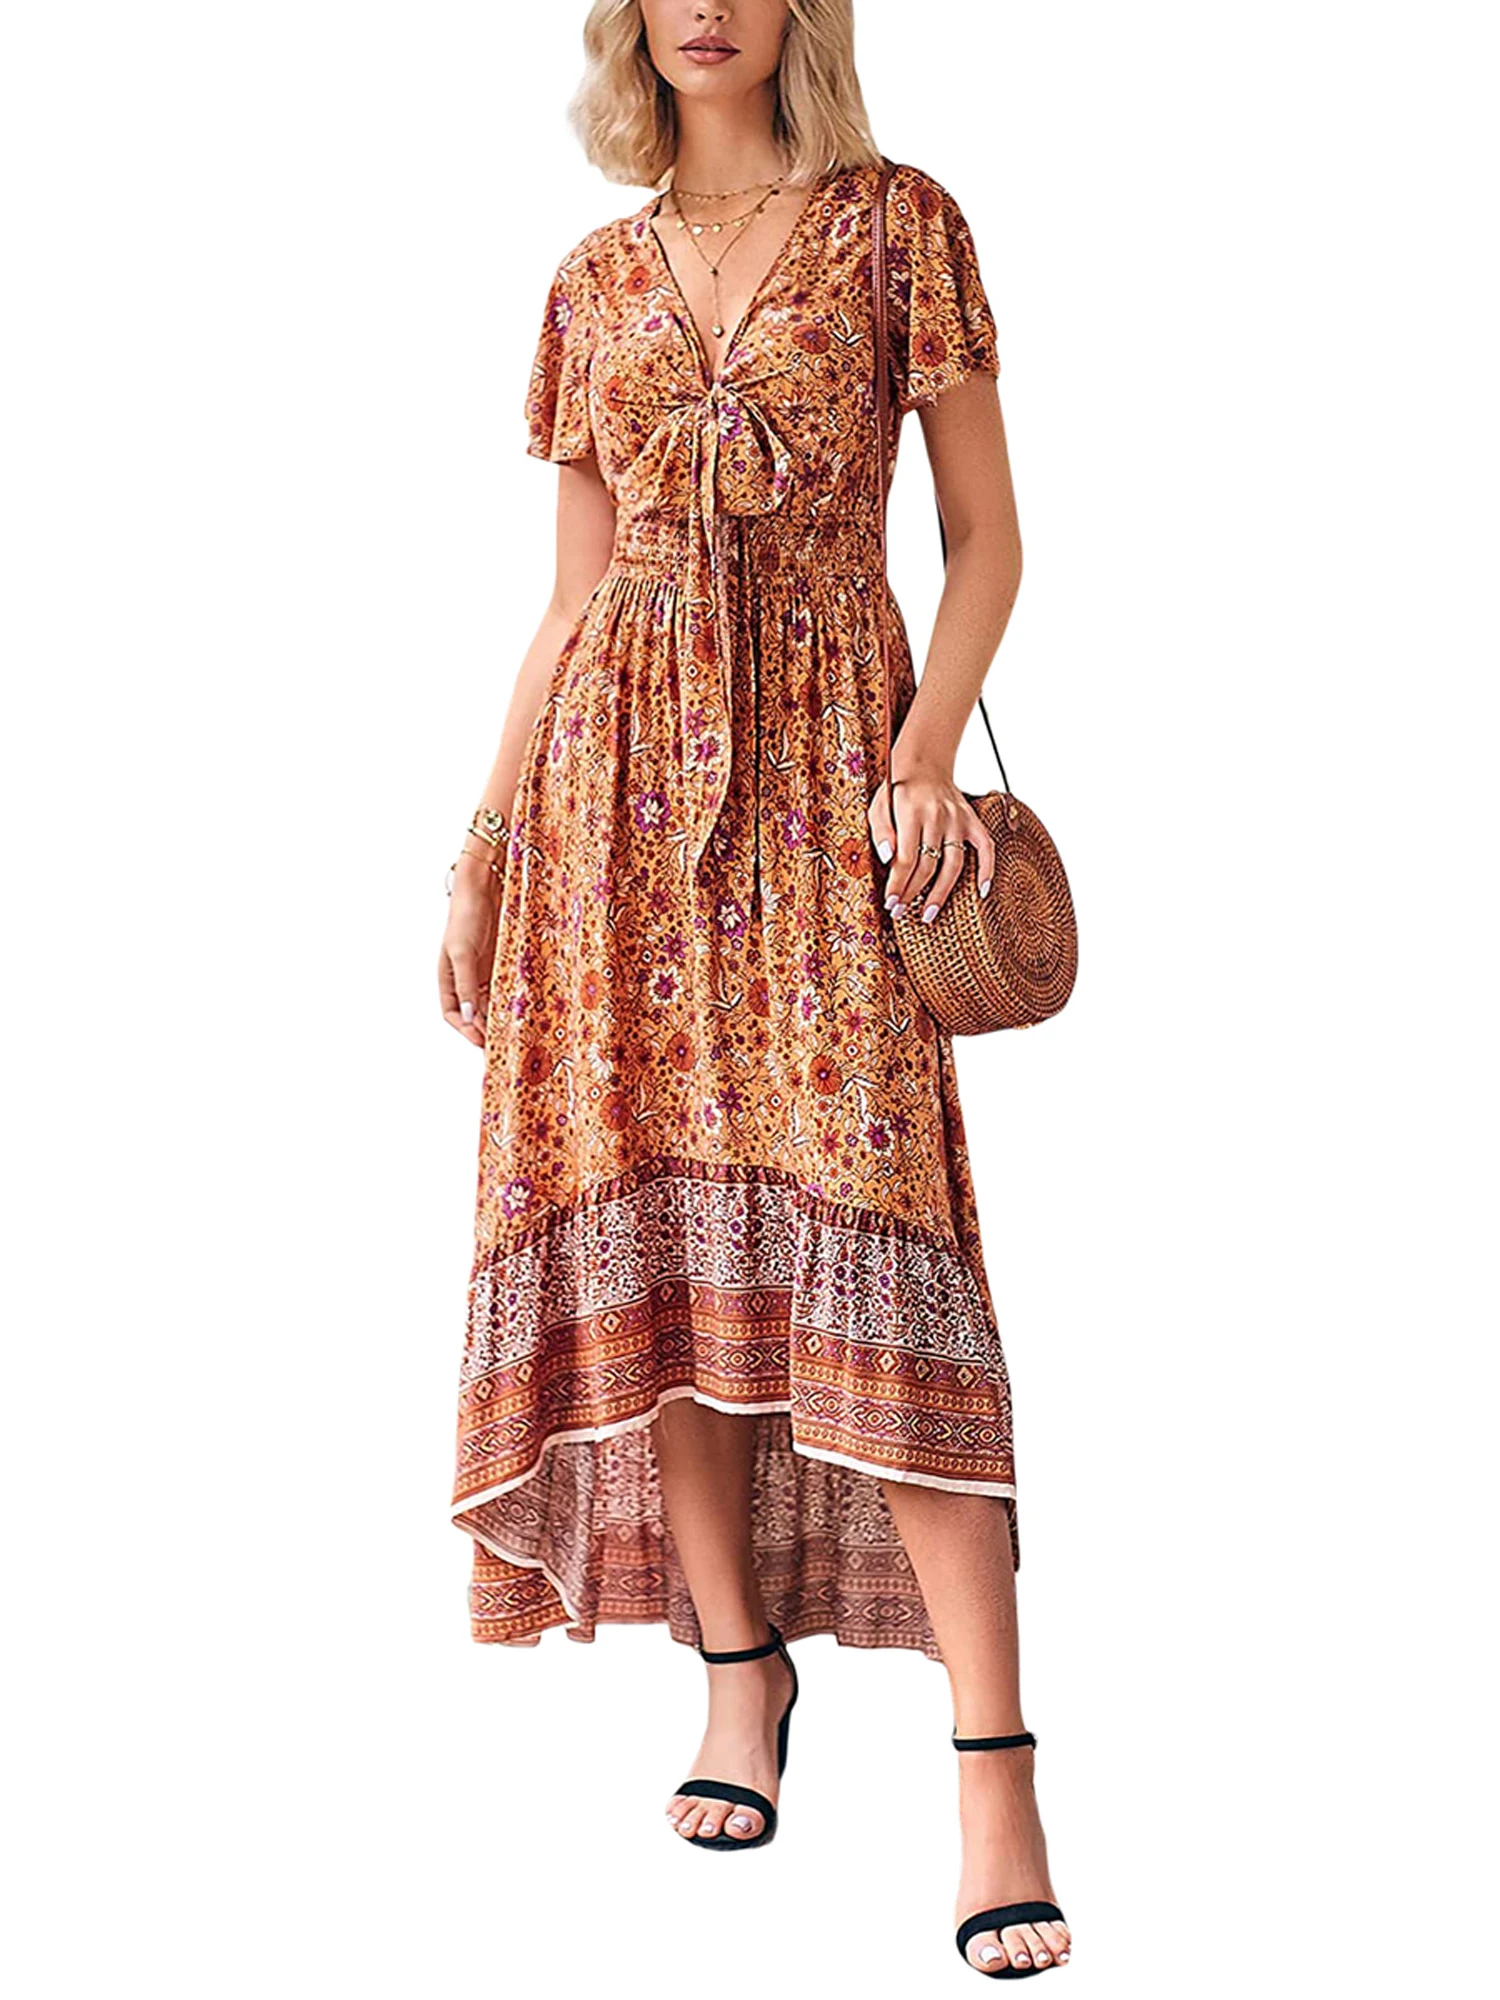 Bohemian Chic Women s Short Sleeve V Neck Floral Long Dress with Irregular Hem and Tie Up Detail - Perfect for Summer Holidays